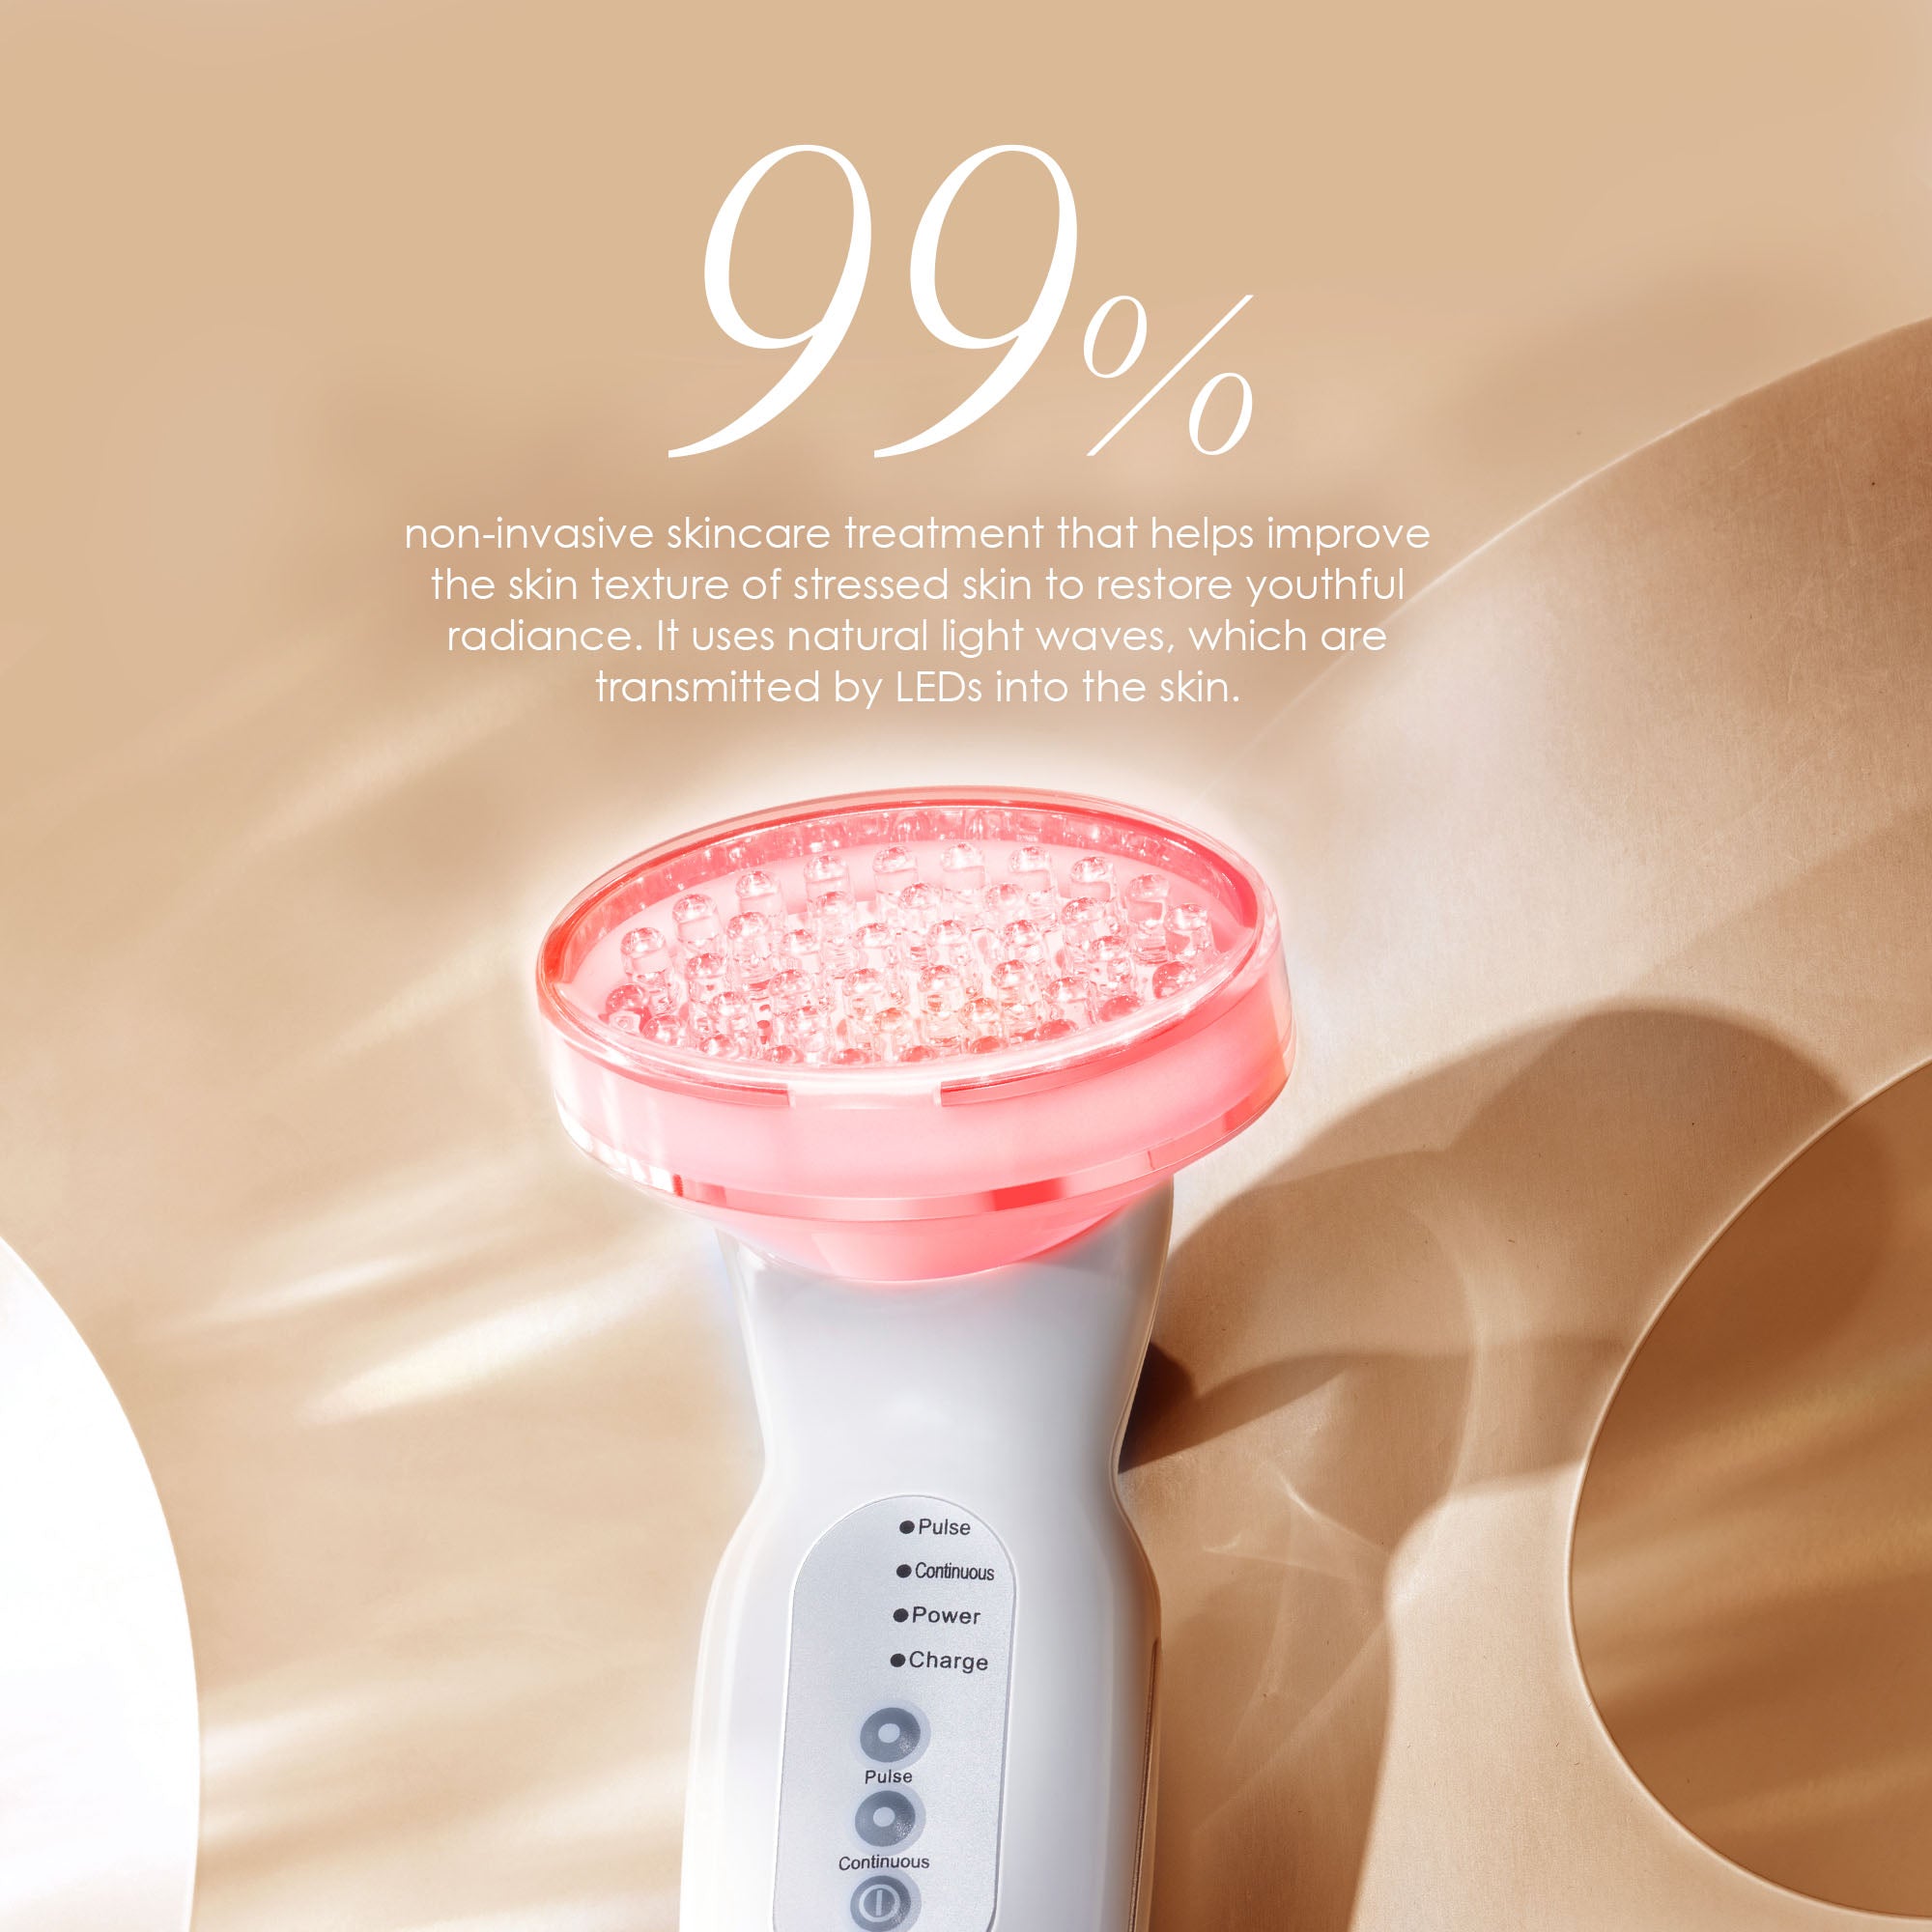 RED LED+ | Anti-Aging Therapy - Project E Beauty